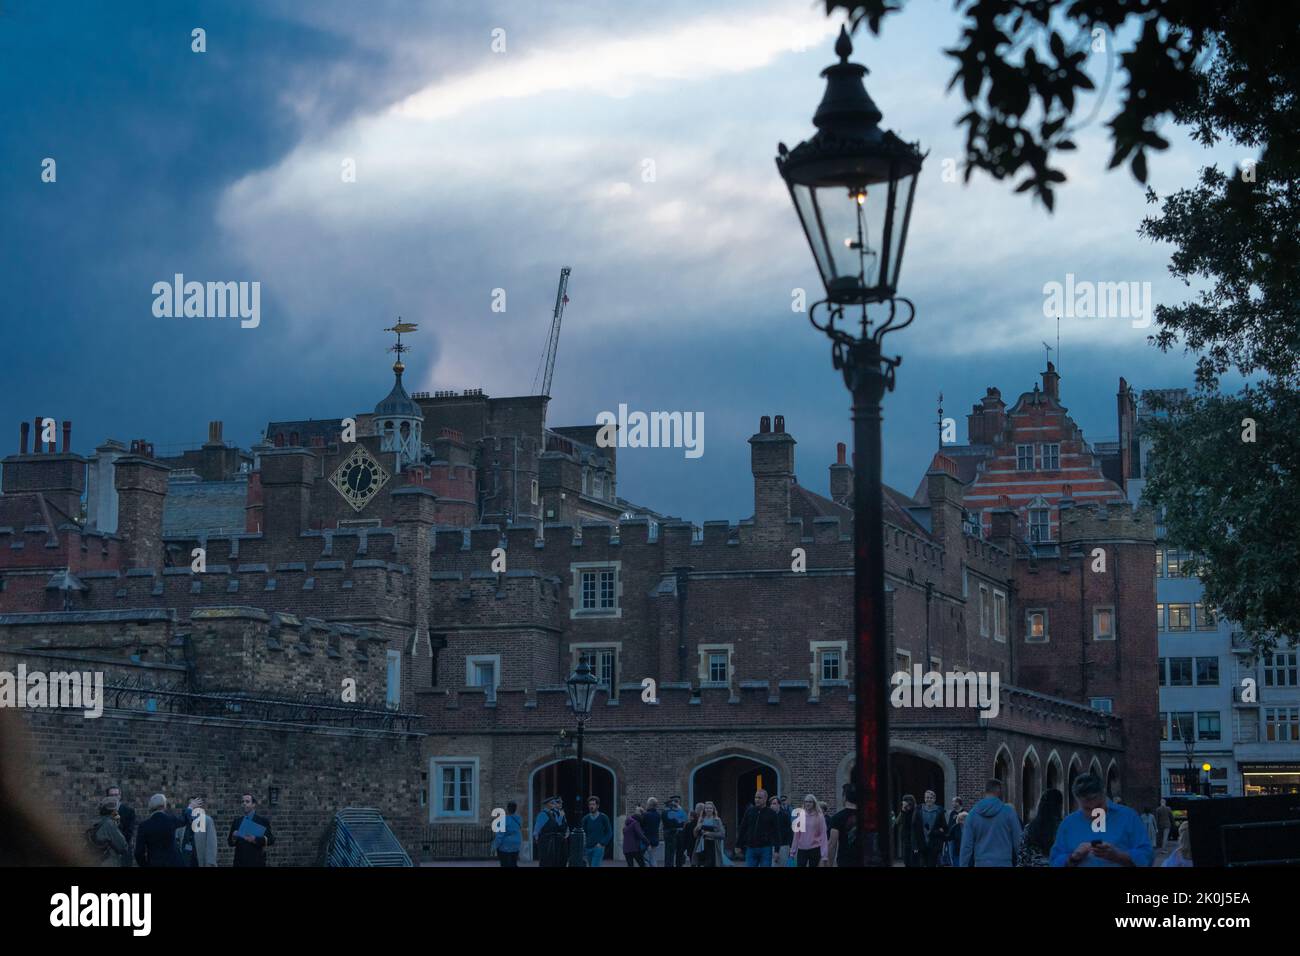 St James's Palace is the most senior royal palace in the United Kingdom. It is the monarch's royal court and is located in the City of Westminster. Stock Photo